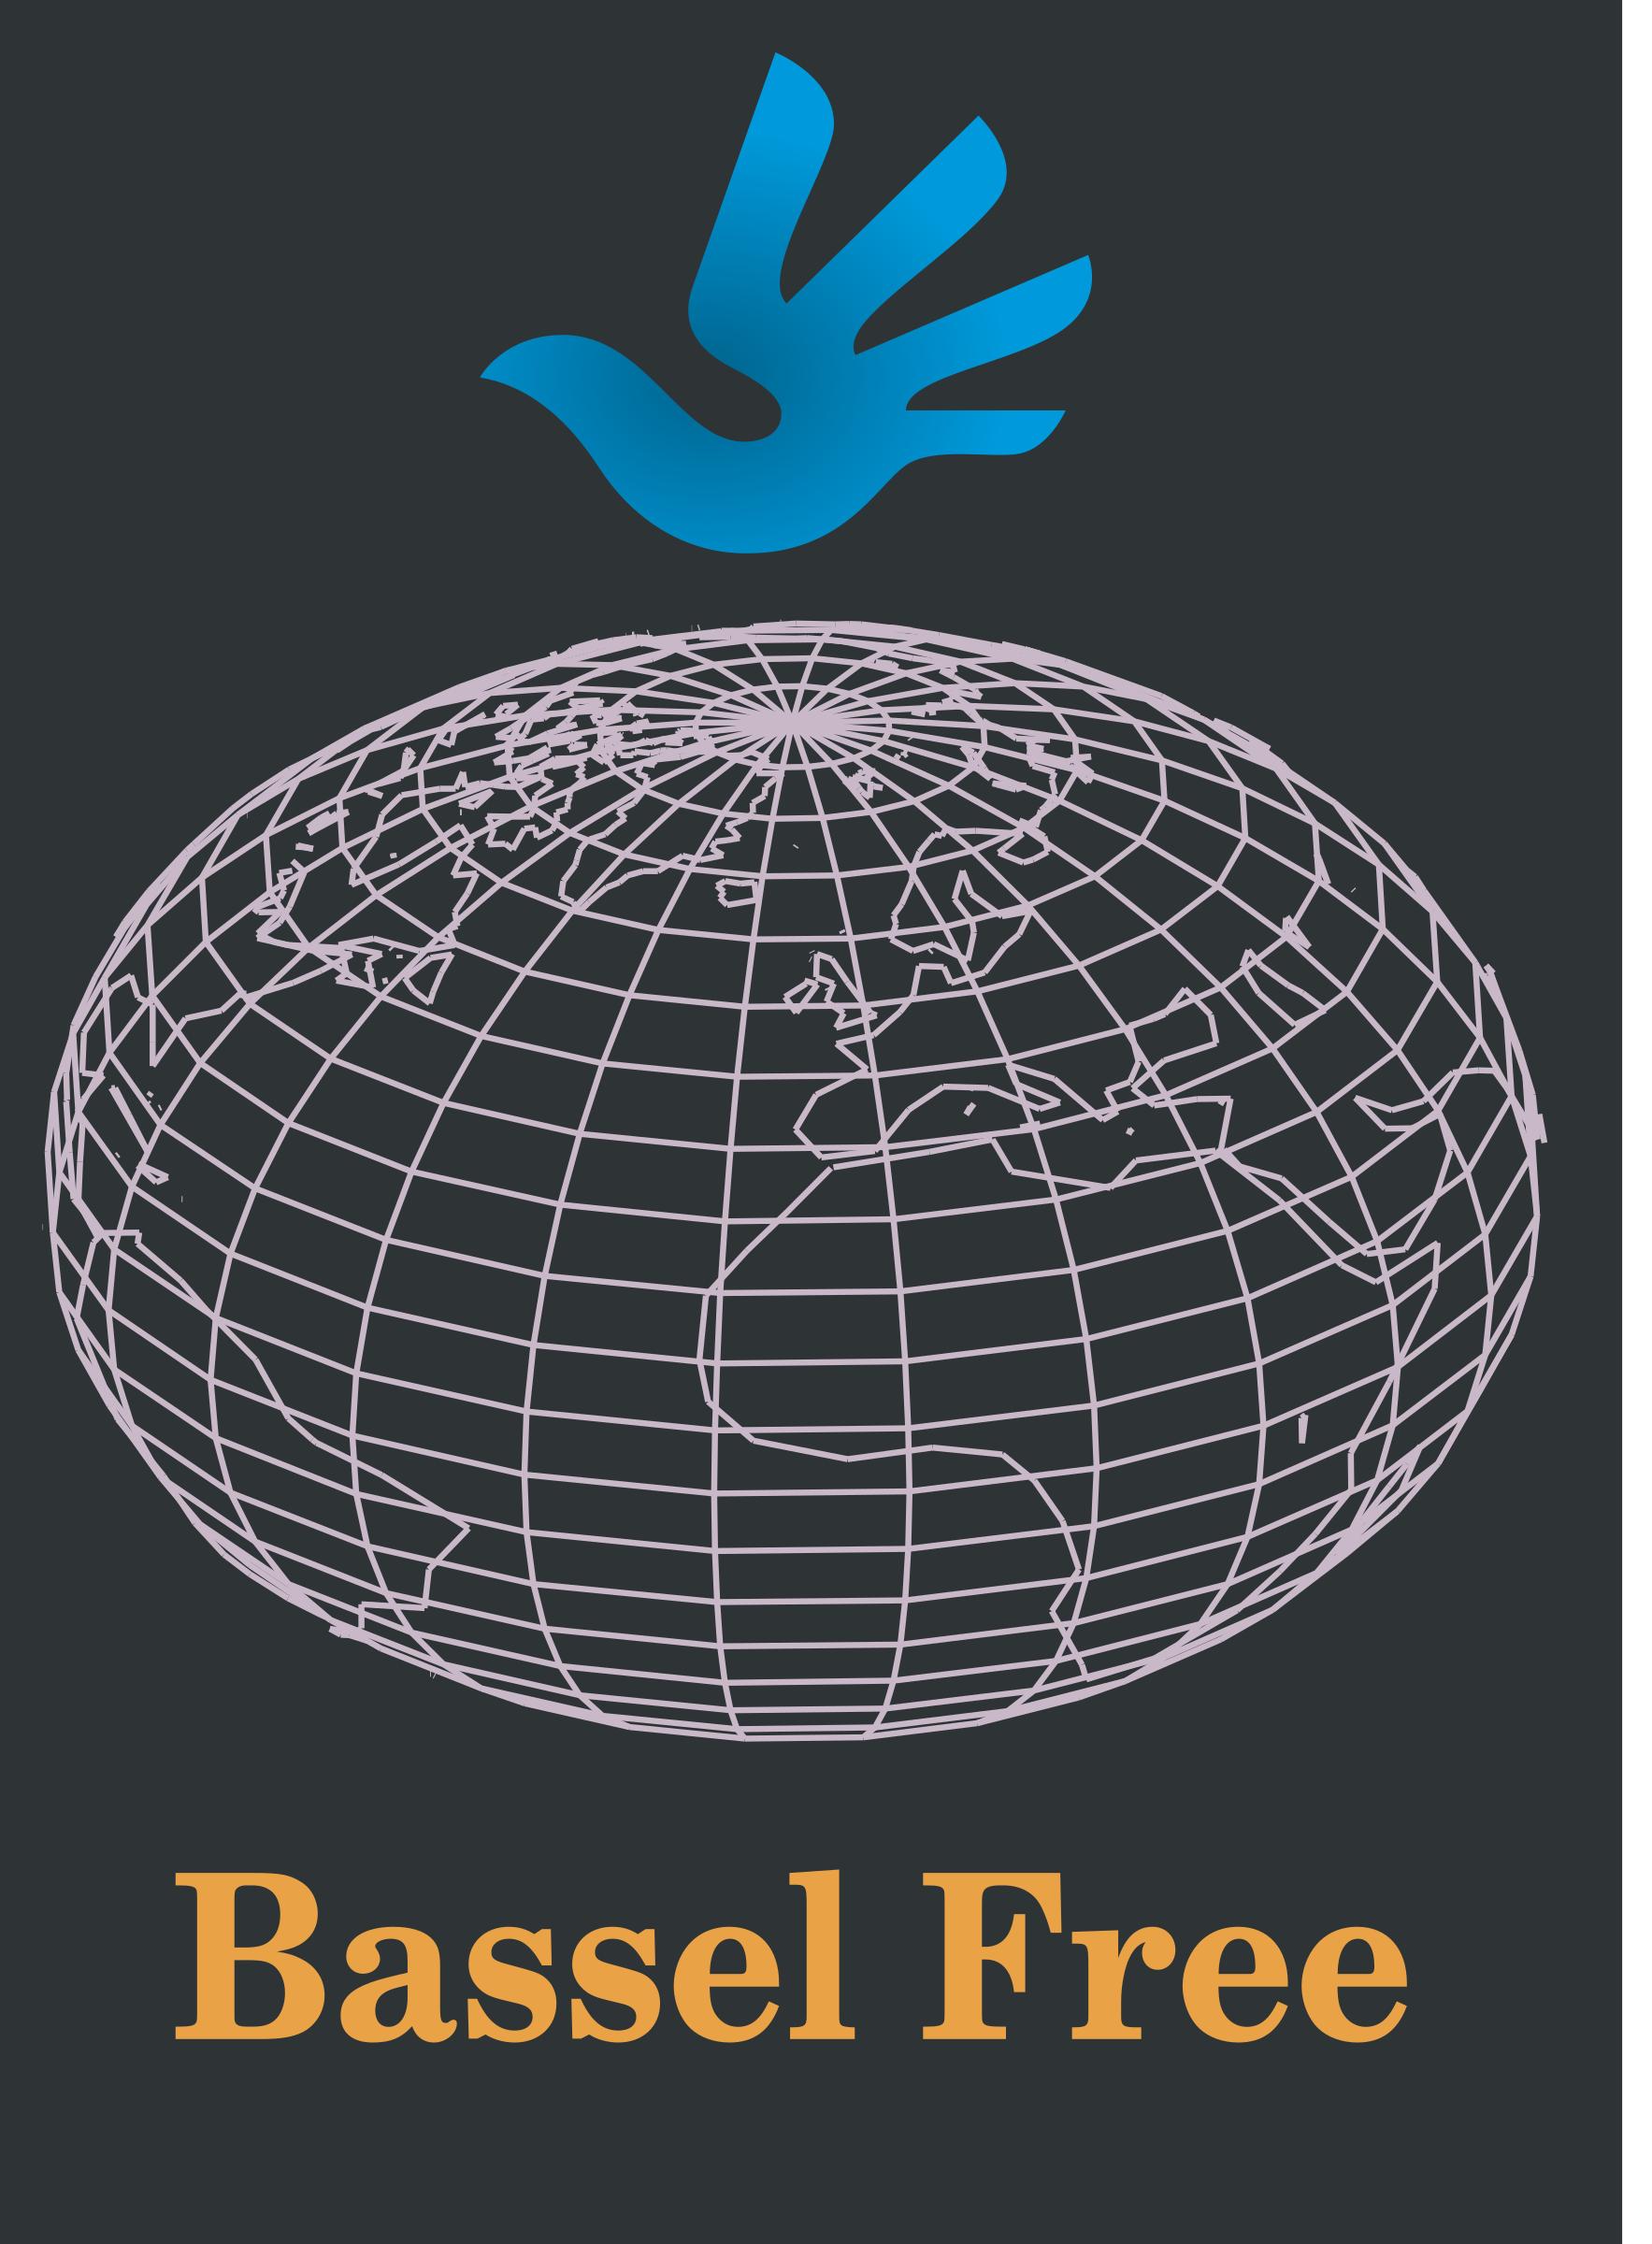 Everywhere in the world we want Freedom of Bassel. png